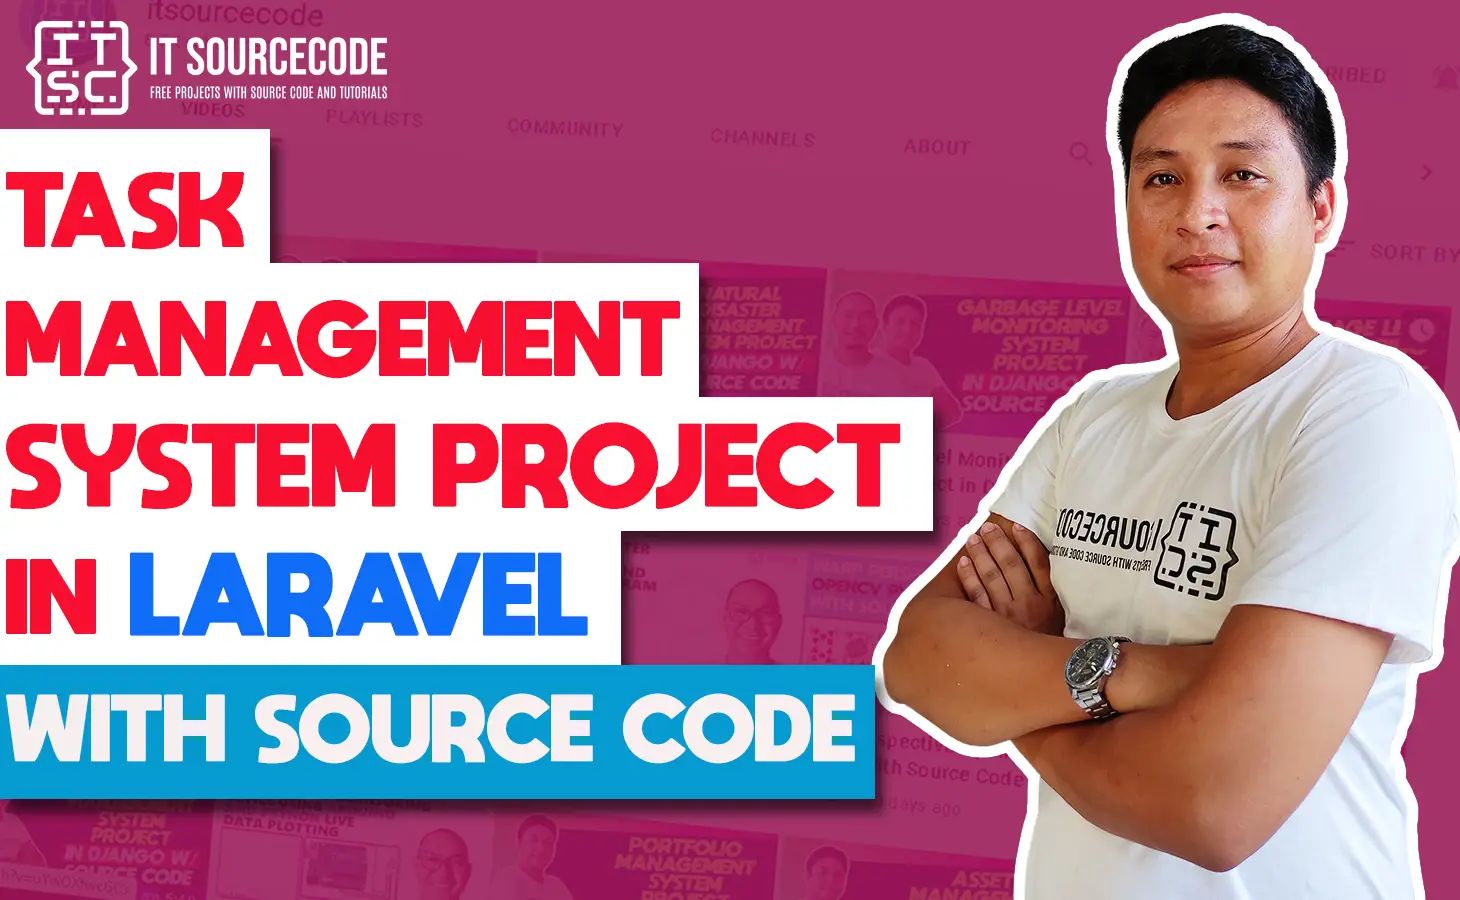 Task Management System Project in Laravel with Source Code